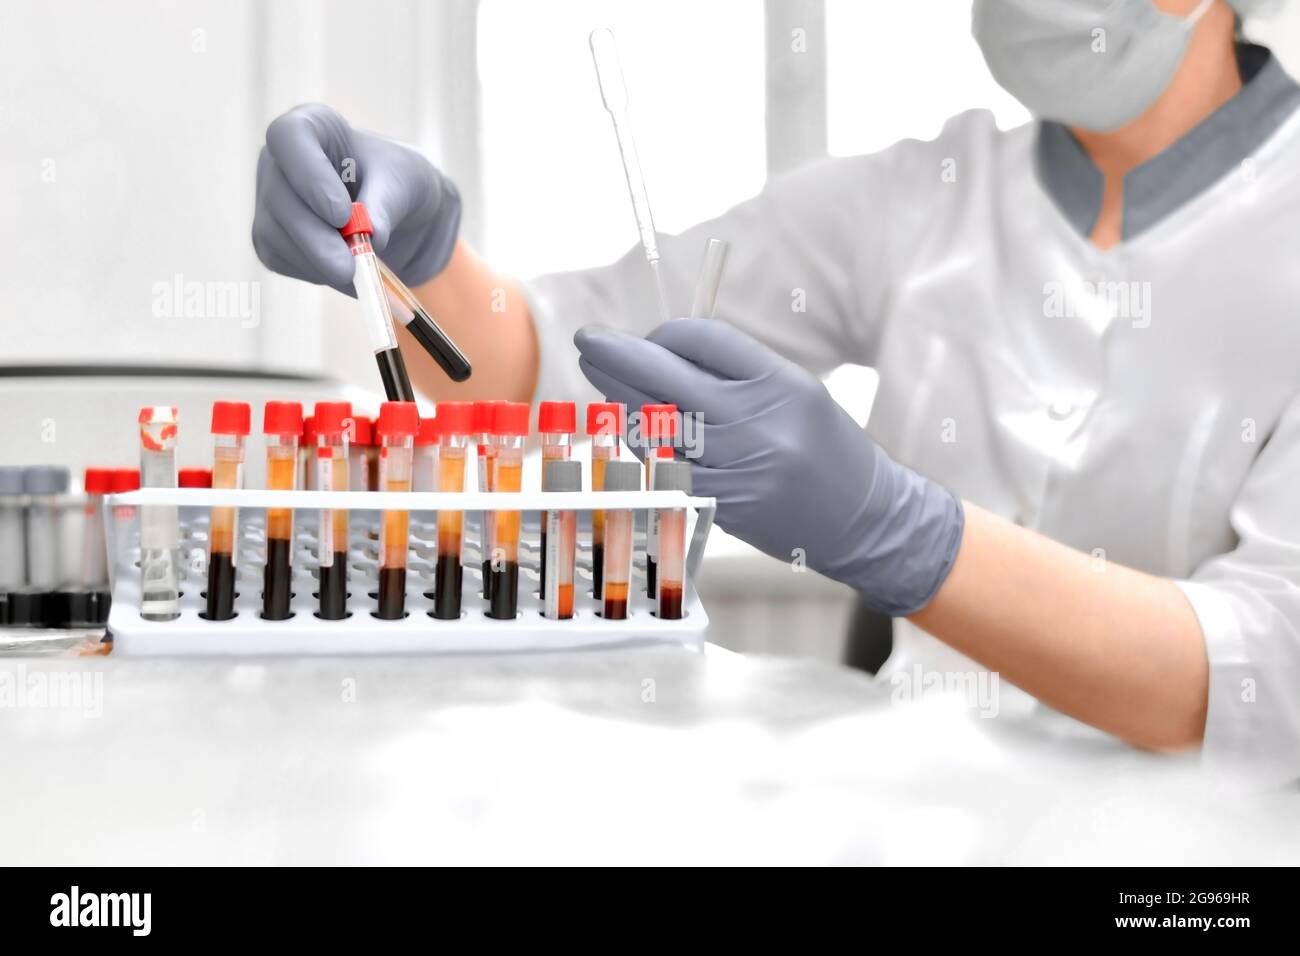 The work of the laboratory assistant with blood tests in test tubes. Hand gestures in protective gloves. Stock Photo